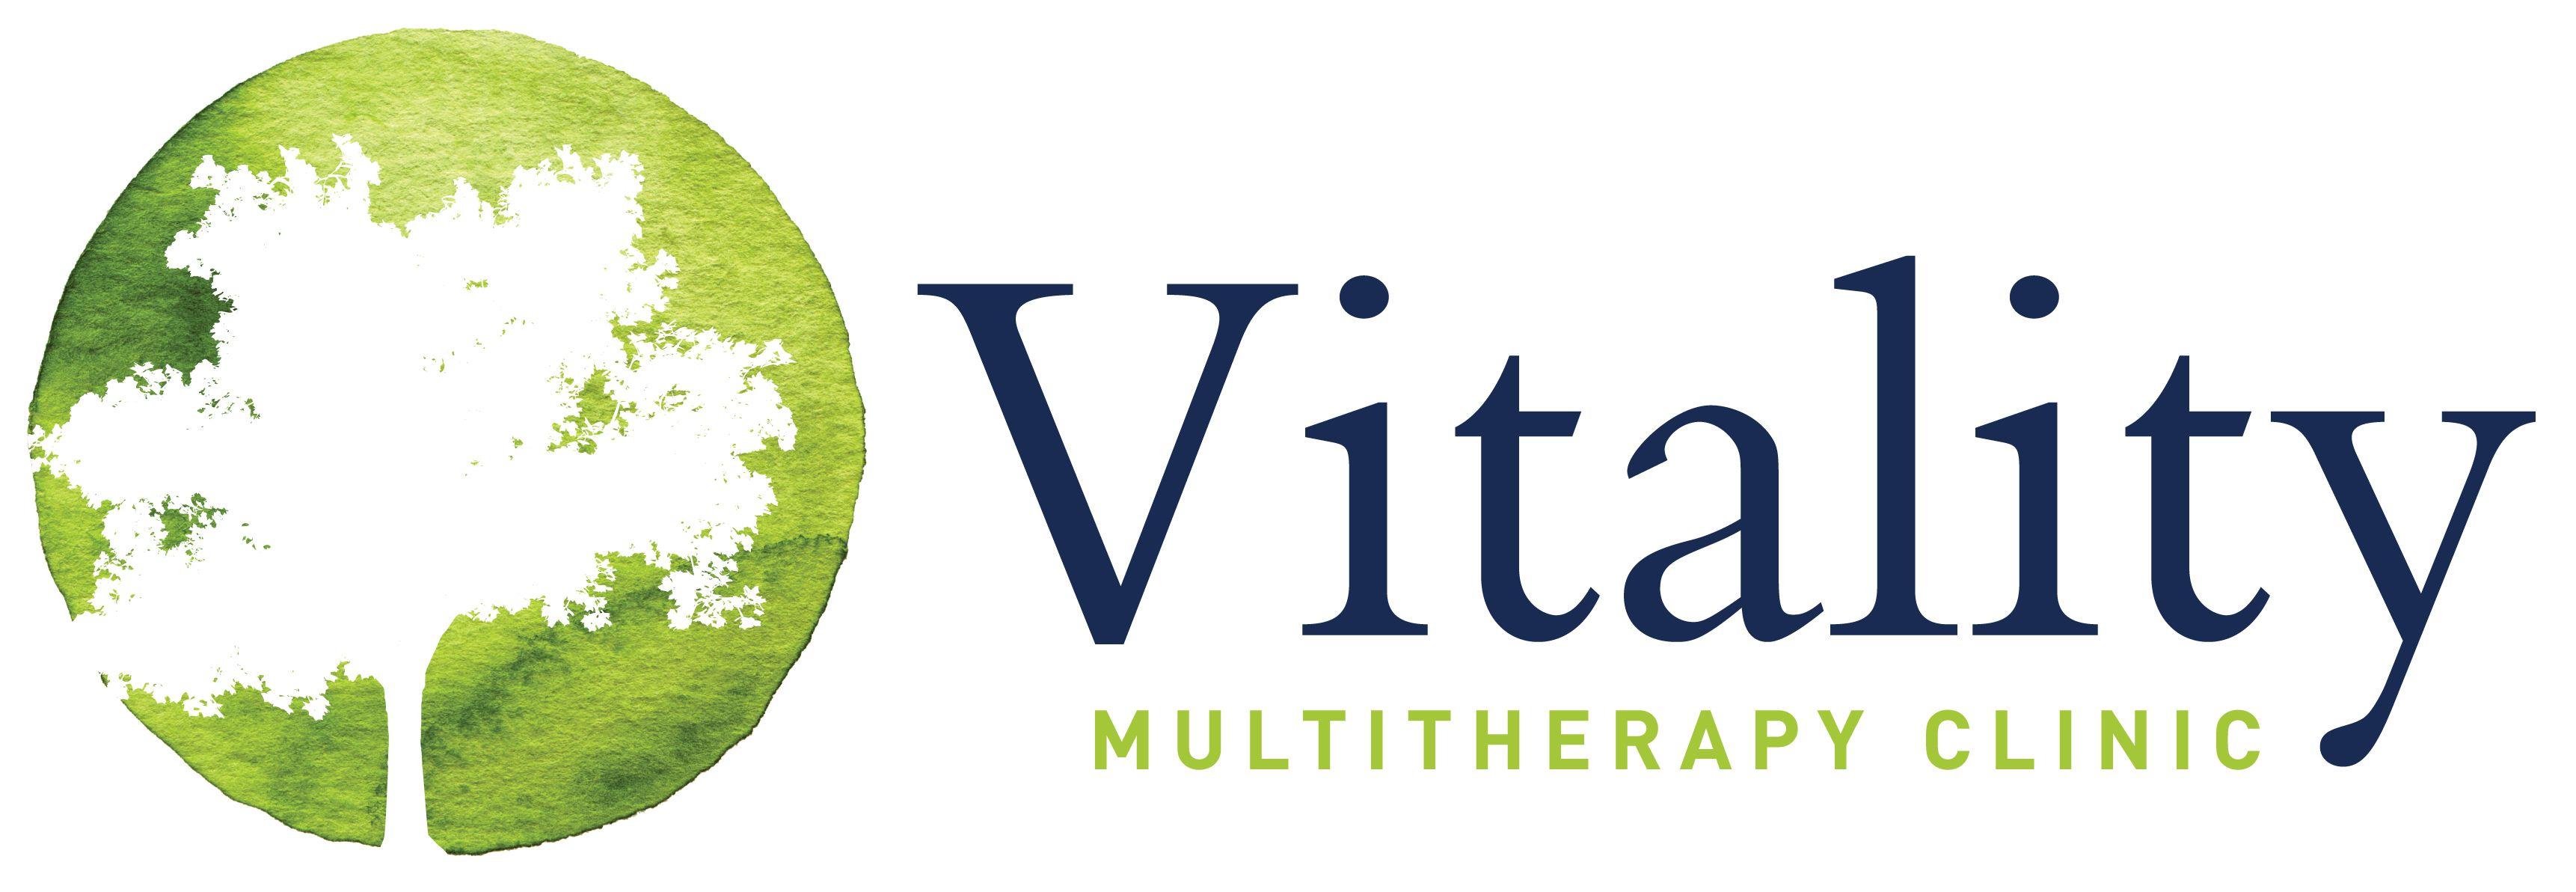 Vitality Logo - Vitality Multitherapy Clinic - Integrated Health and Wellness Clinic ...